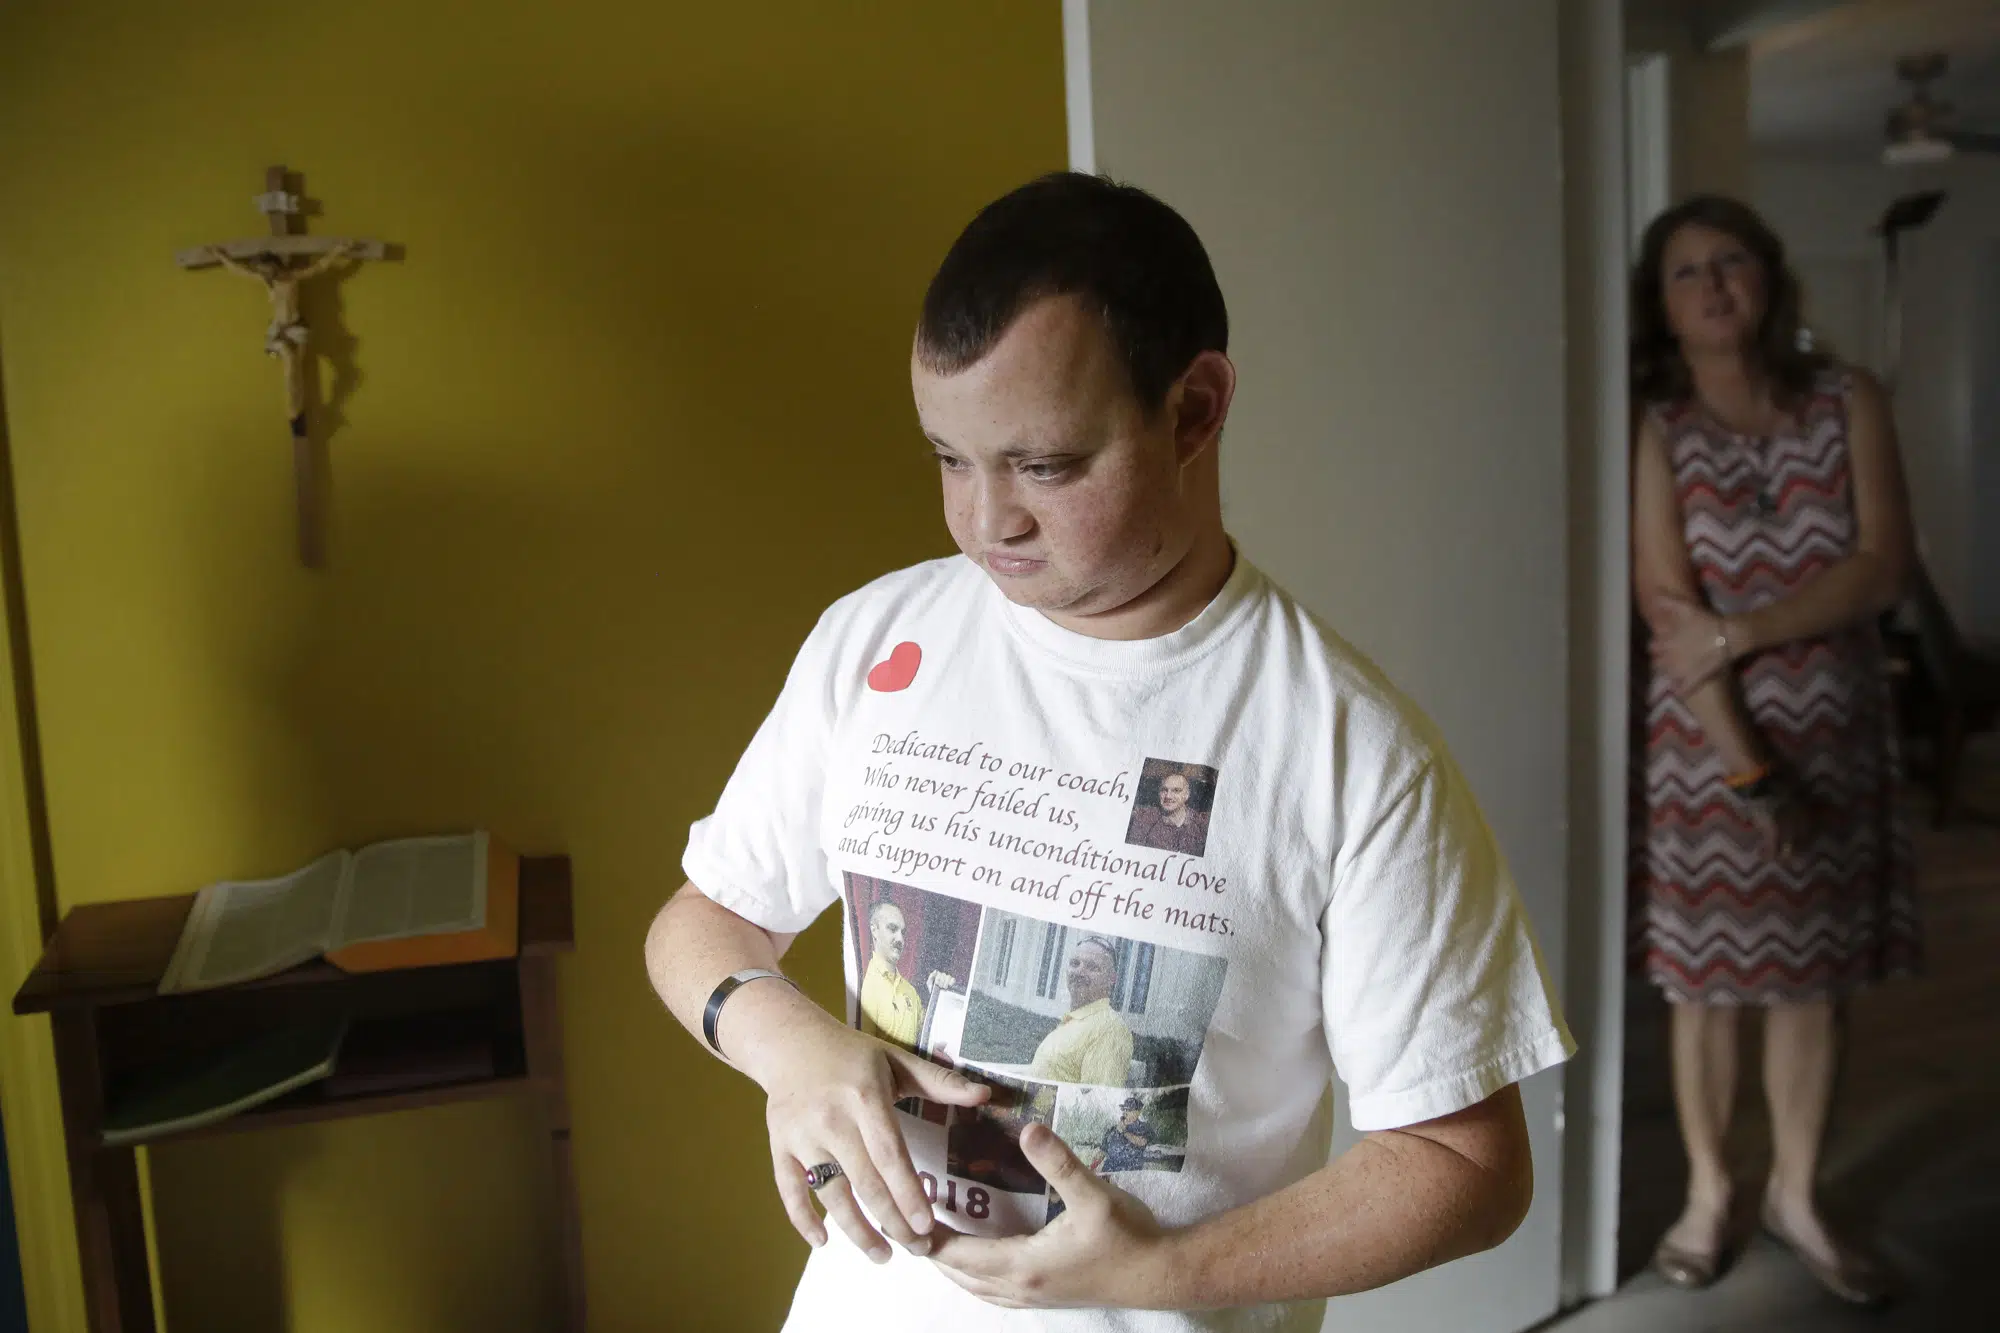 FILE - Corey Hixon, 24, wears a shirt with photographs of his father, Chris Hixon, as his mother, Debbi Hixon, stands in the doorway on Friday, Feb. 14, 2020, in Hollywood, Fla. Chris Hixon was killed in the school shooting on Valentine's Day two years ago at Marjory Stoneman Douglas High School in Parkland, Fla. (AP Photo/Brynn Anderson, File)